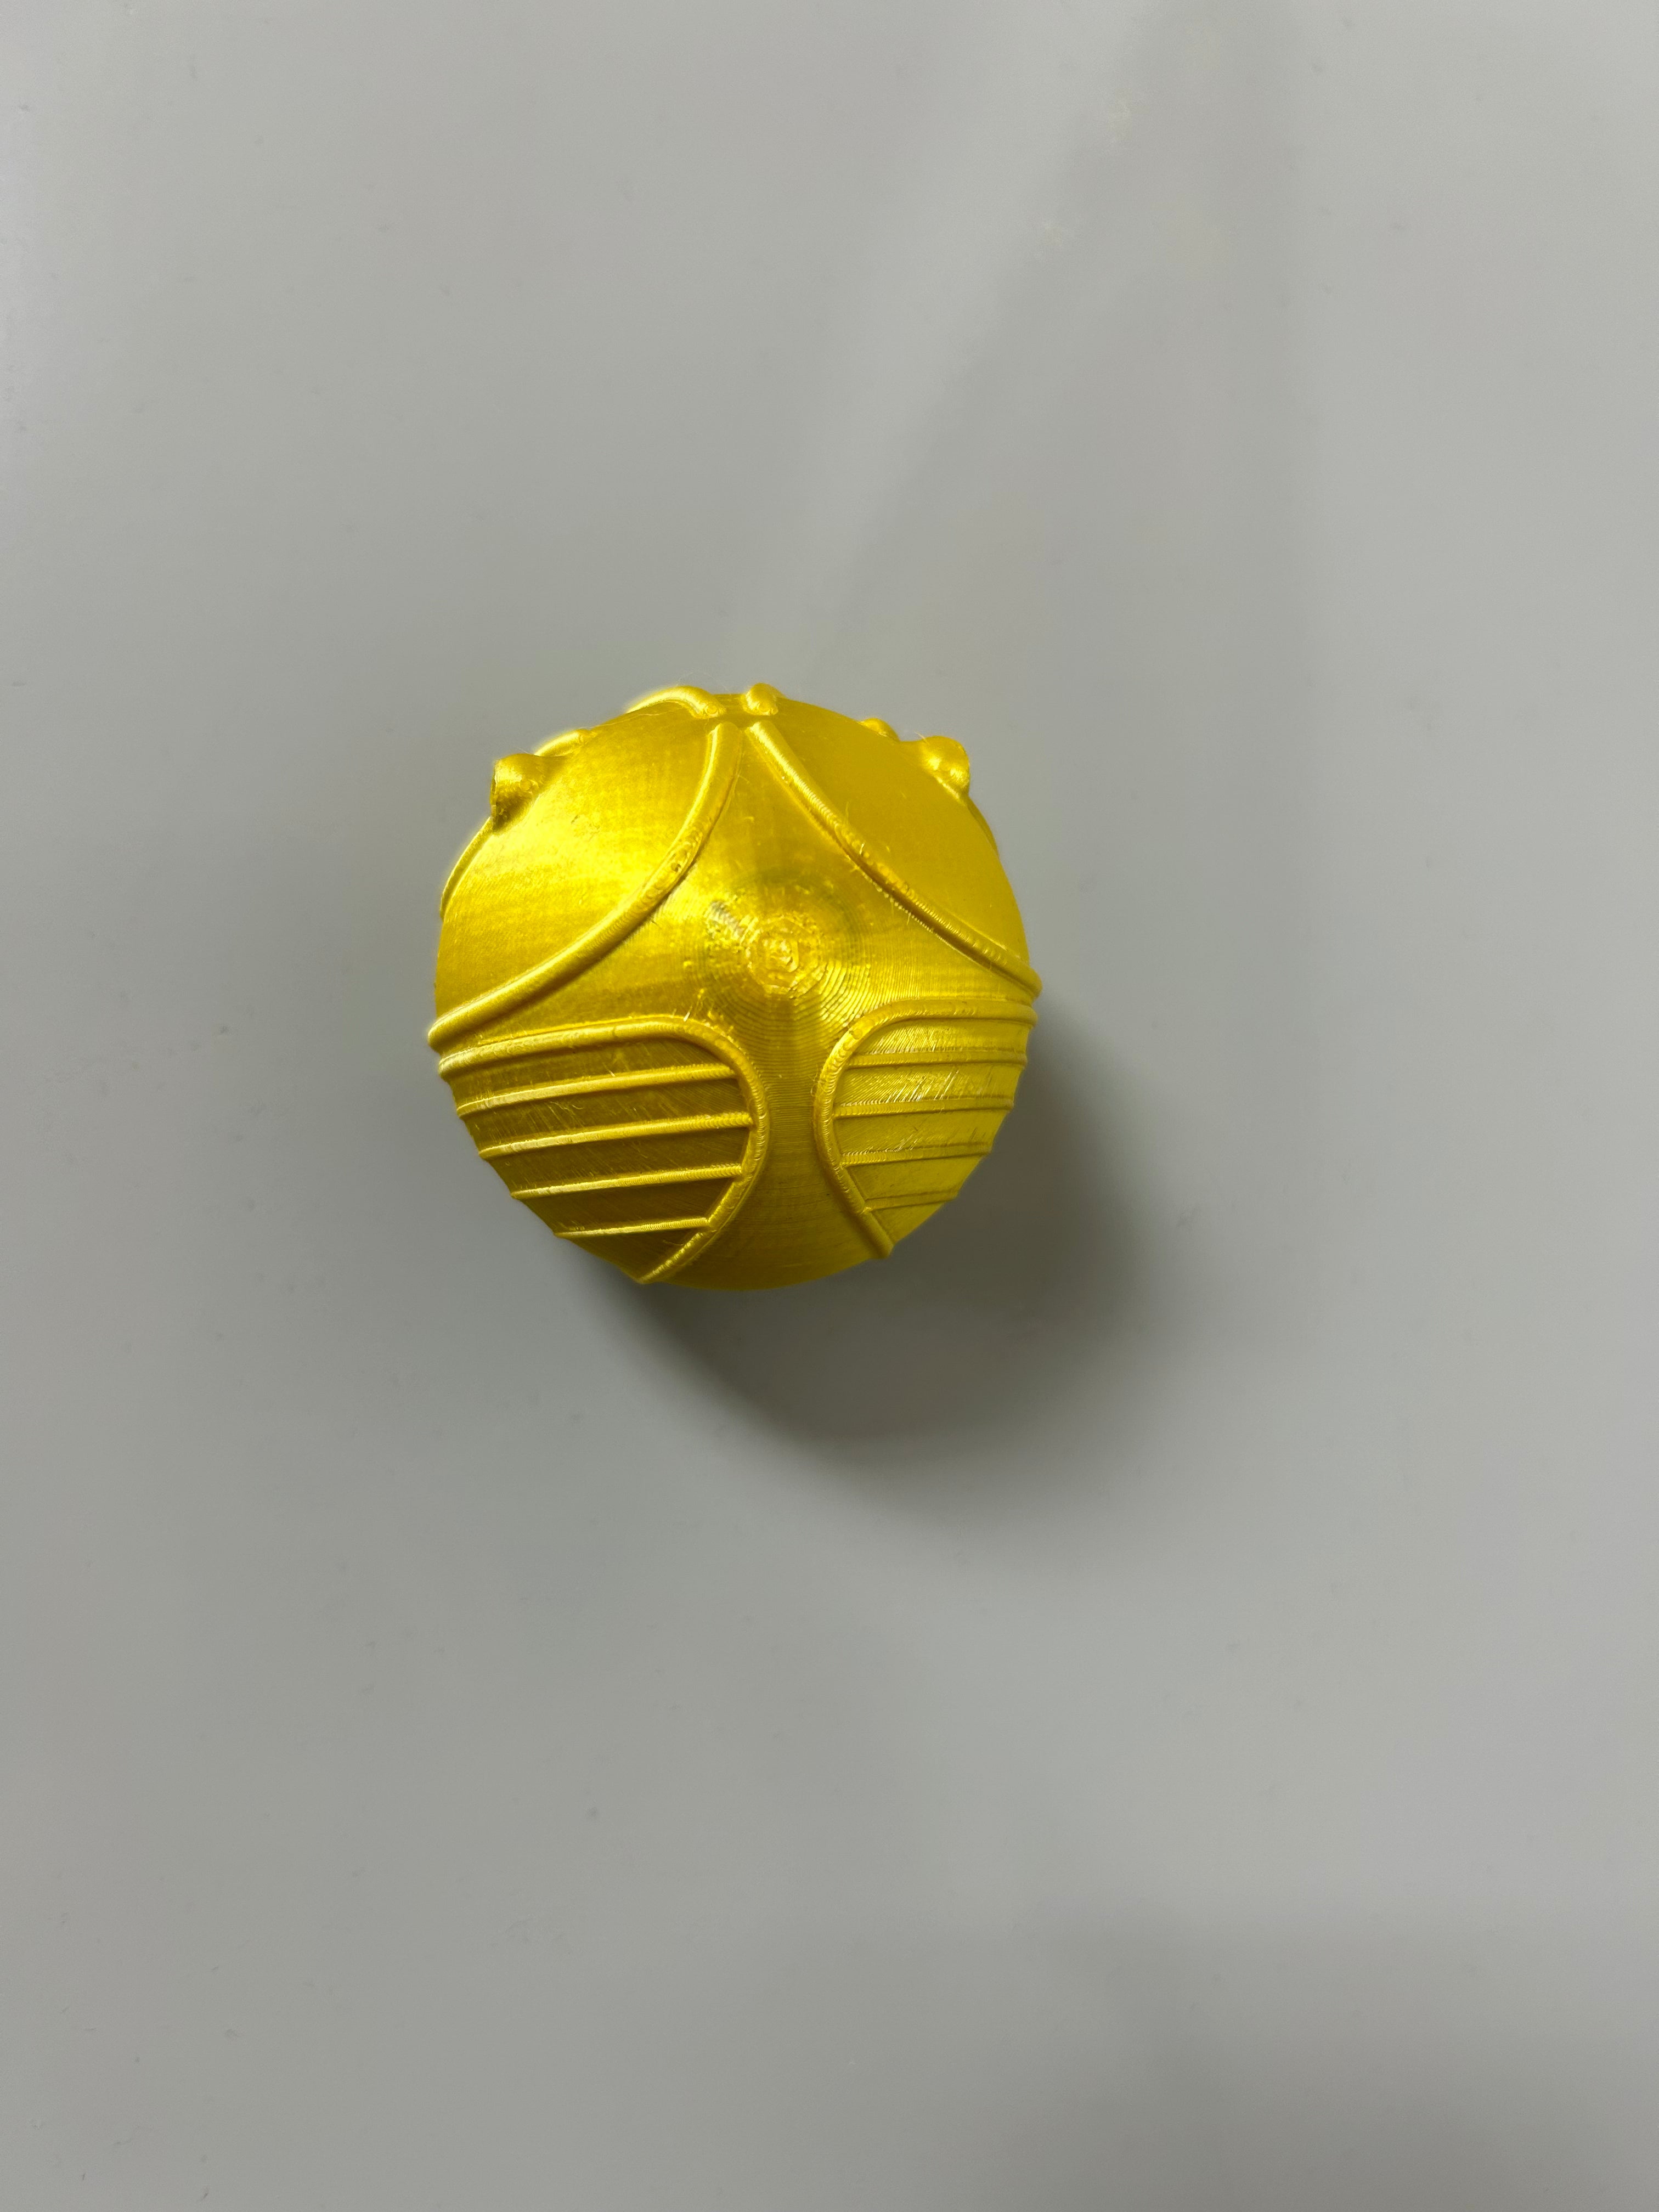 Golden snitch lamp （with battery)